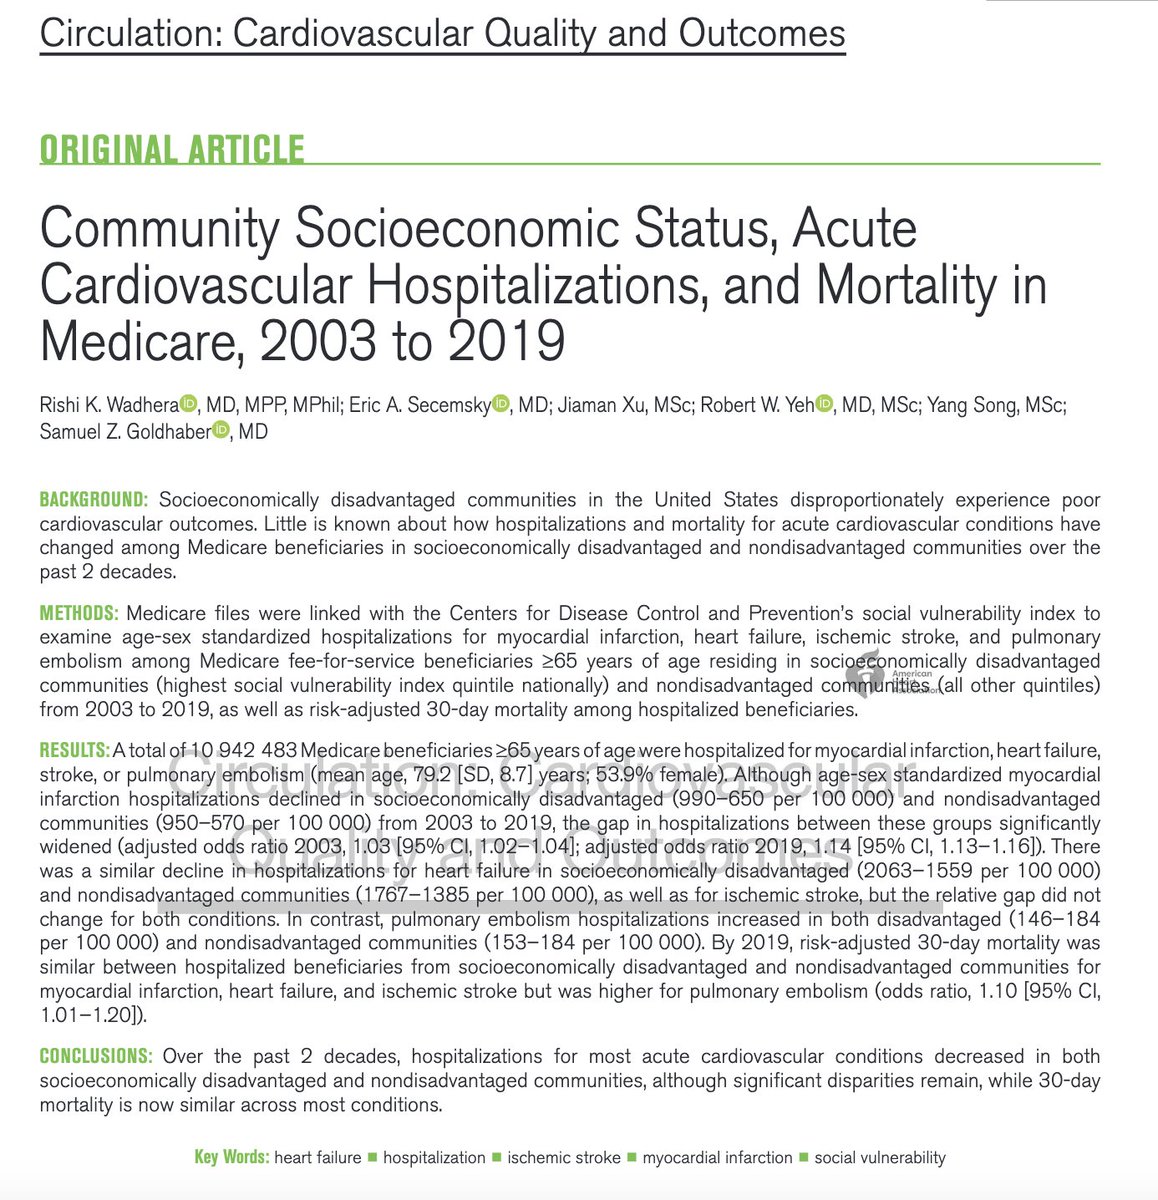 Our @CircOutcomes study finds ⬇️ cardiovascular hospitalizations in both socioeconomically disadvantaged & non-disadvantaged US communities over the past 2 decades, although disparities persist 30-day mortality rates now similar for MI, HF, & stroke ahajournals.org/doi/abs/10.116…